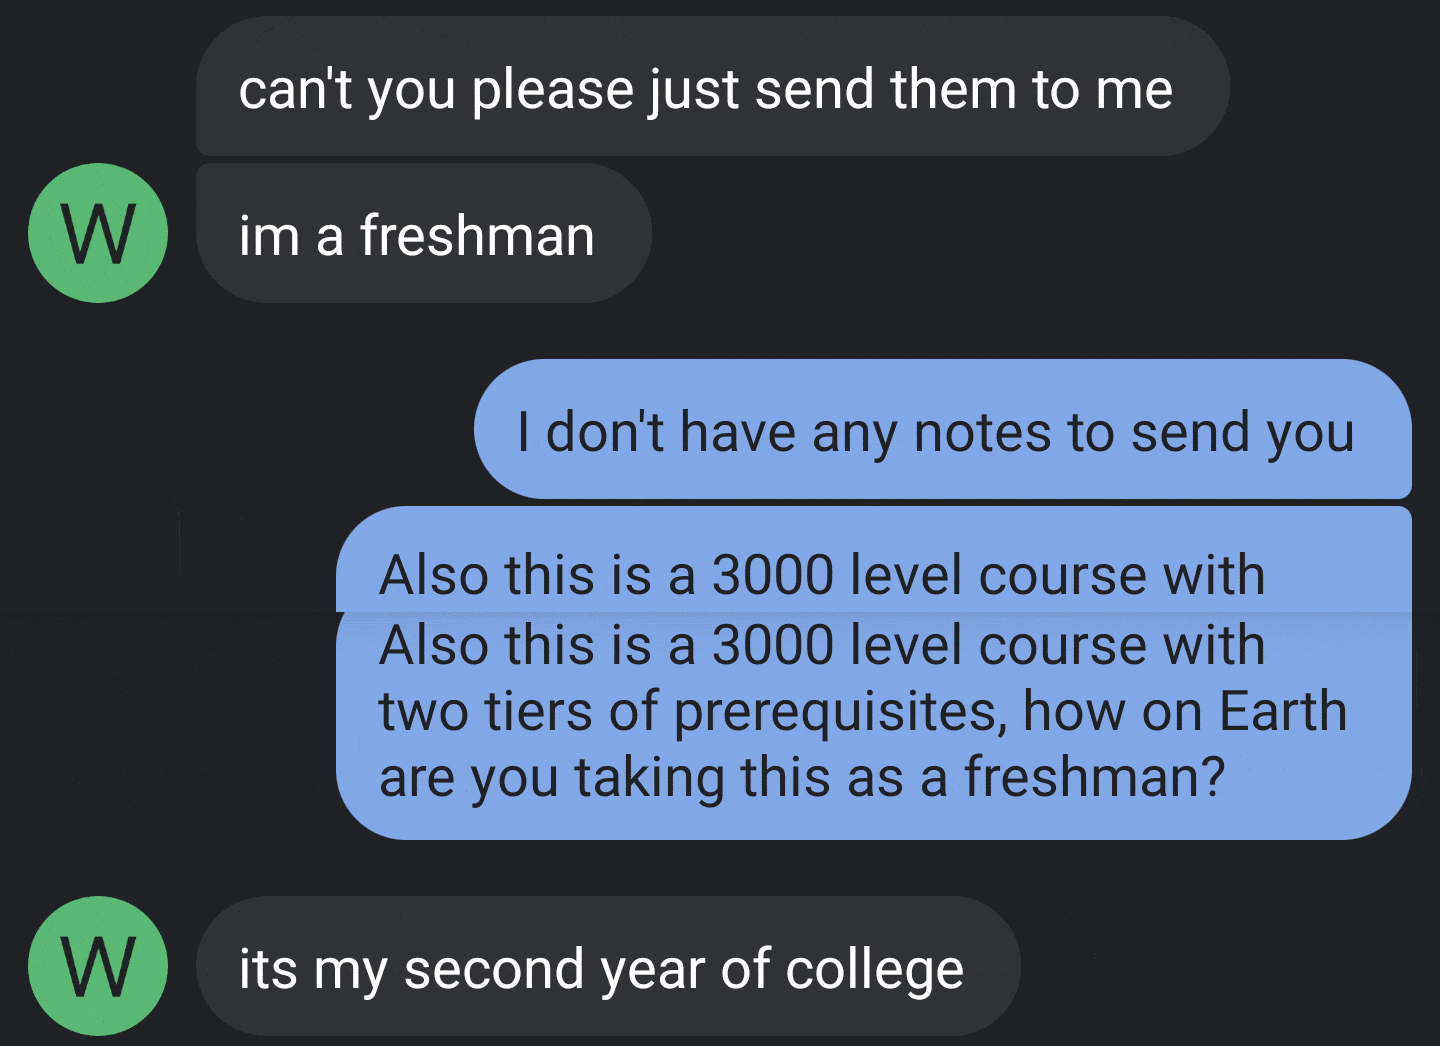 multimedia - can't you please just send them to me W im a freshman I don't have any notes to send you Also this is a 3000 level course with Also this is a 3000 level course with two tiers of prerequisites, how on Earth are you taking this as a freshman? W